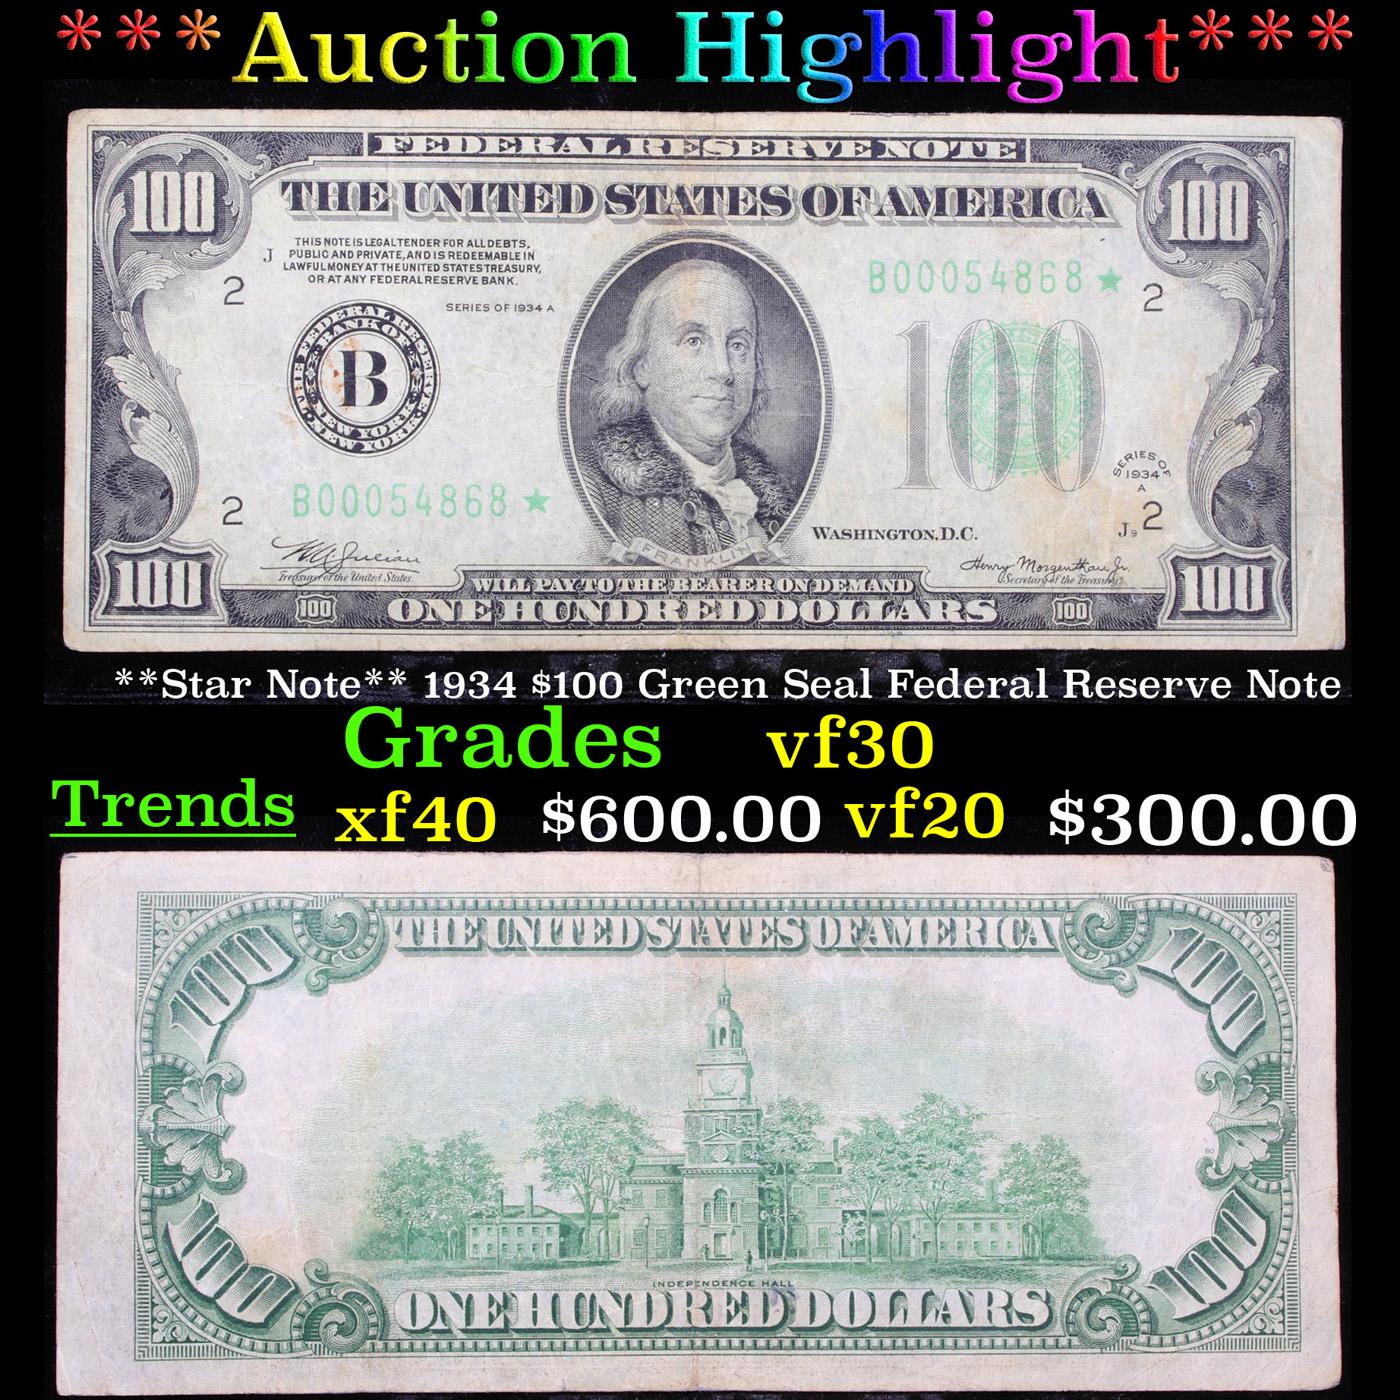 ***Auction Highlight*** **Star Note** 1934 $100 Green Seal Federal Reserve Note Grades vf++ (fc)